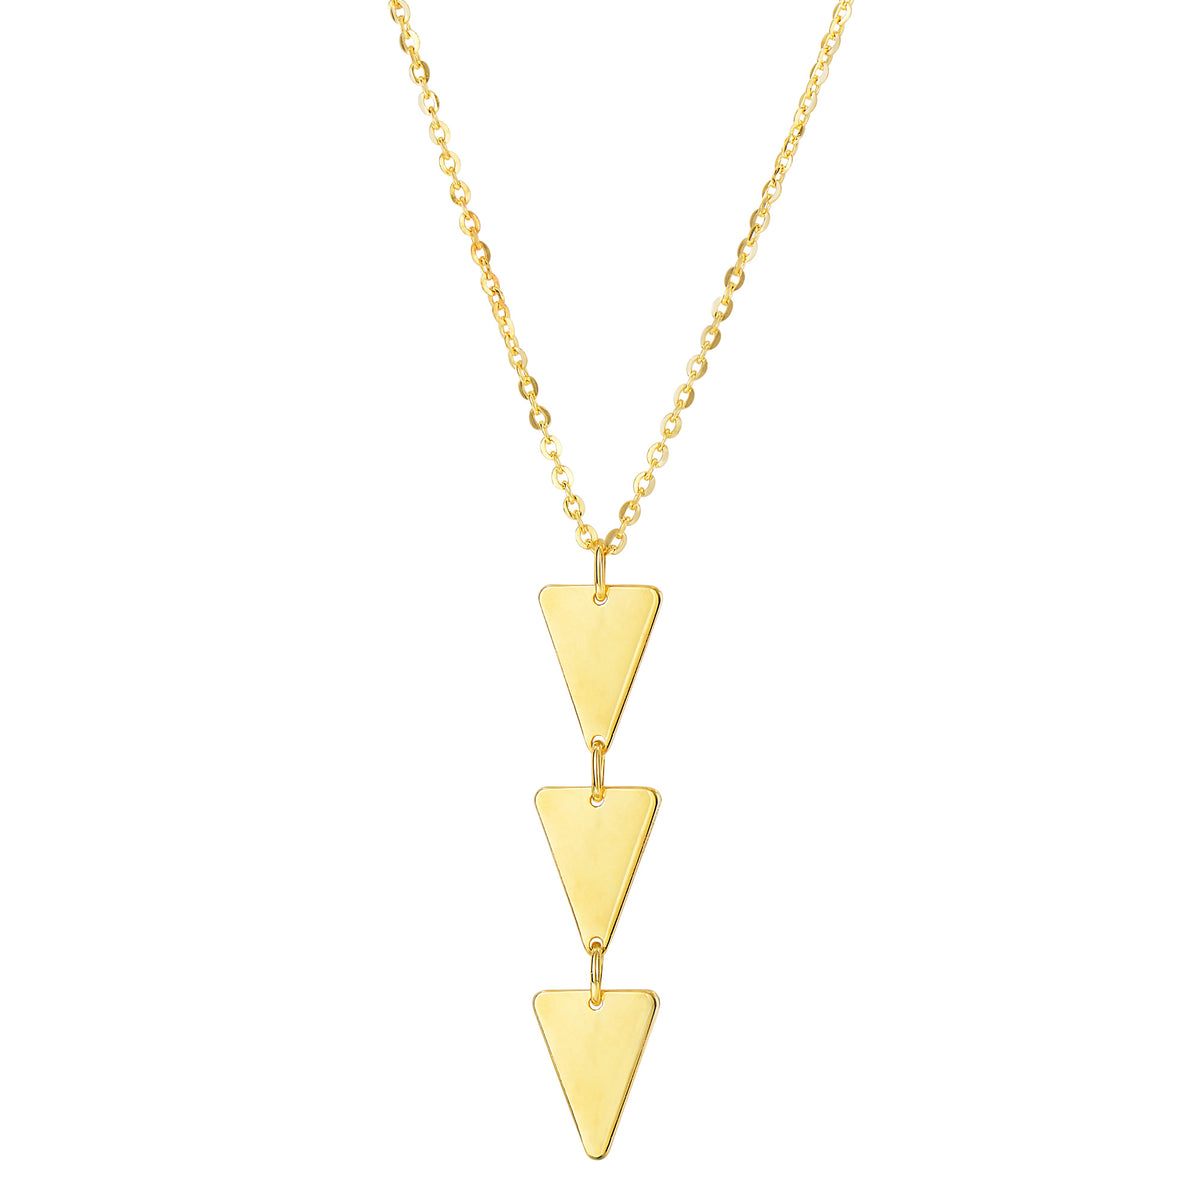 14k Yellow Gold Three Hanging Triangle Pendant Necklace, 18" fine designer jewelry for men and women